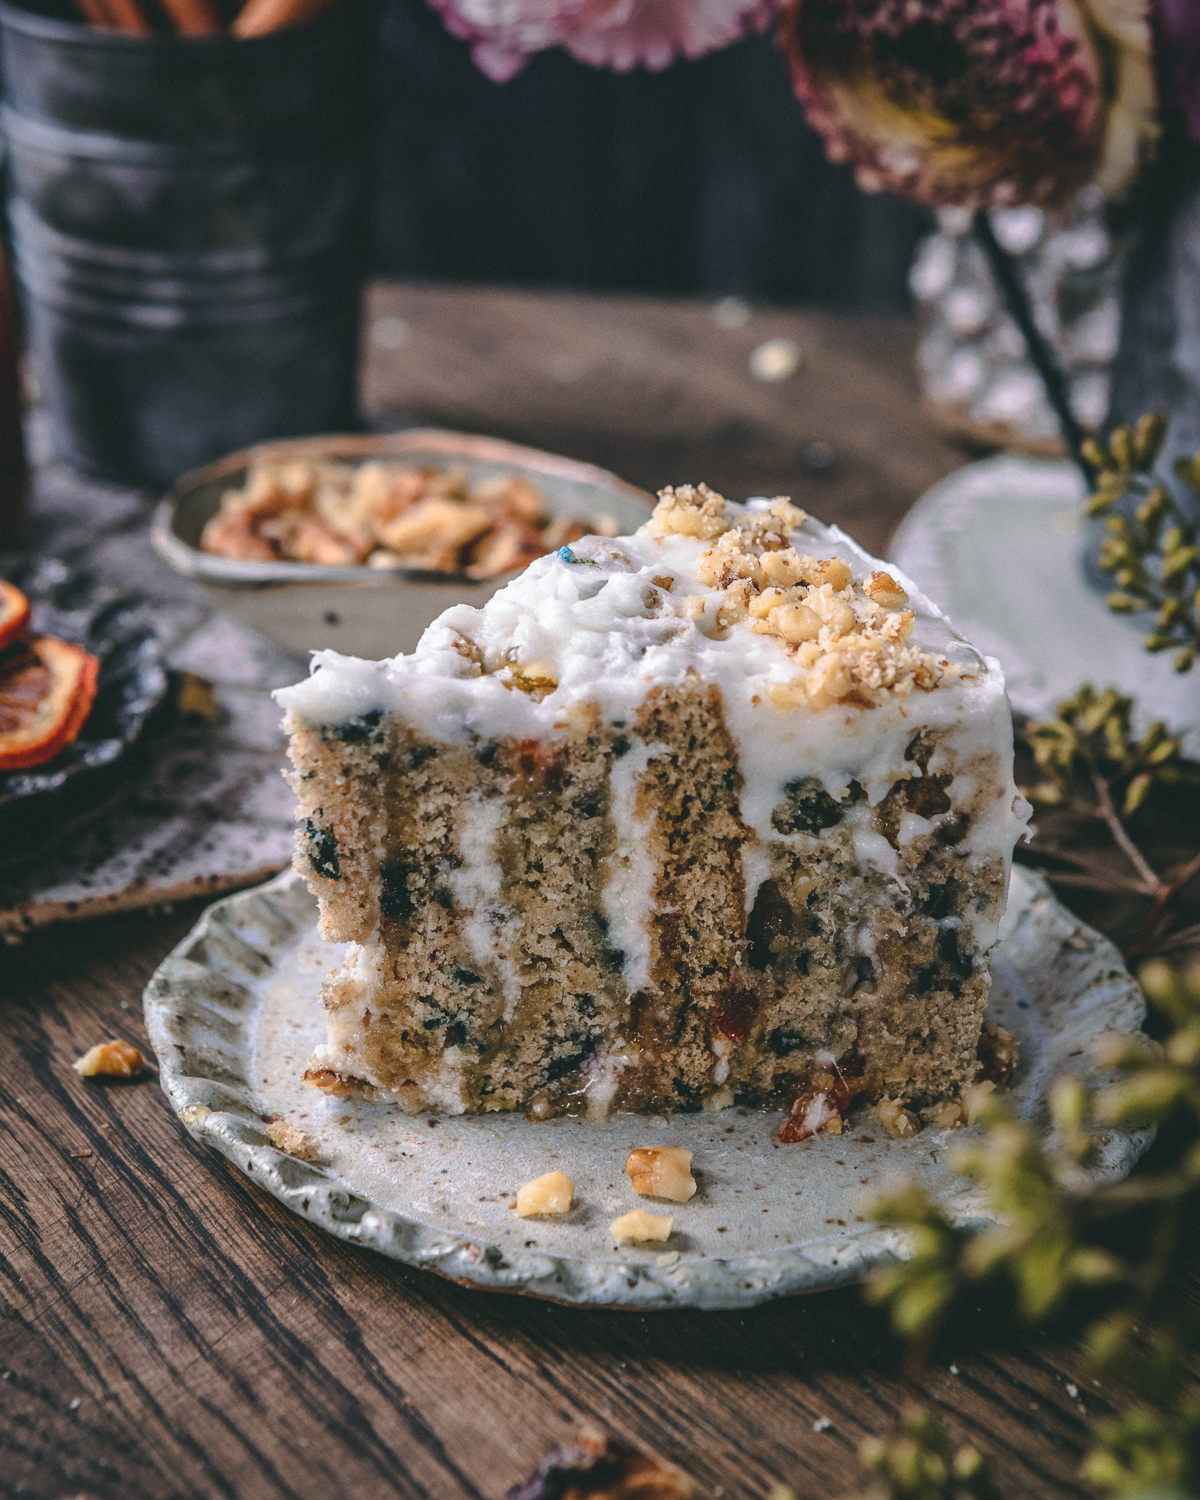 A delicious slice of carrot cake 